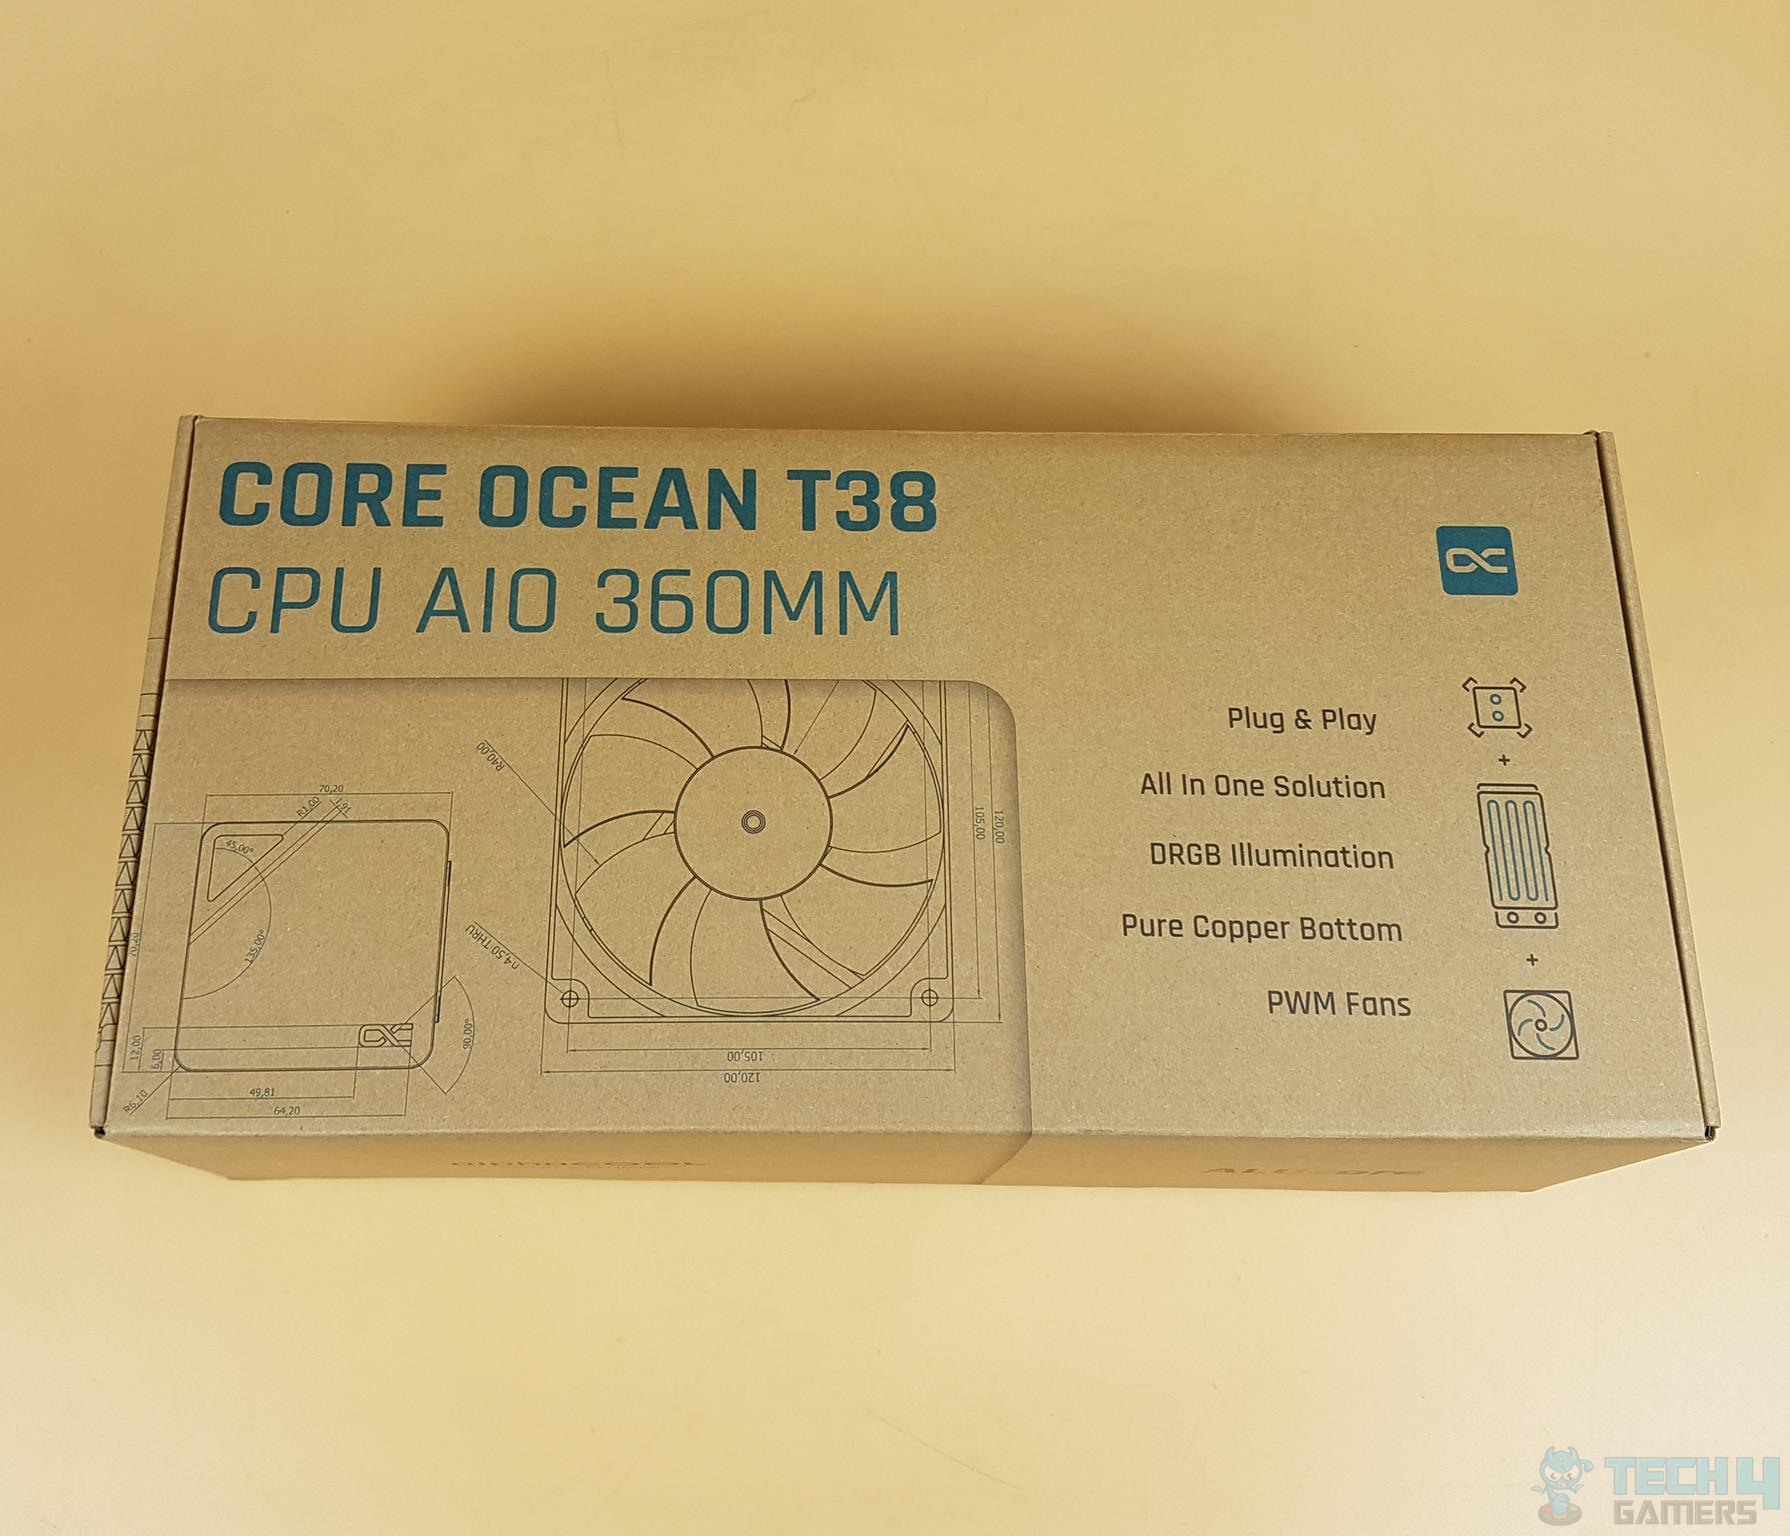 ALPHACOOL CORE OCEAN T38 AIO 360mm — The packaging